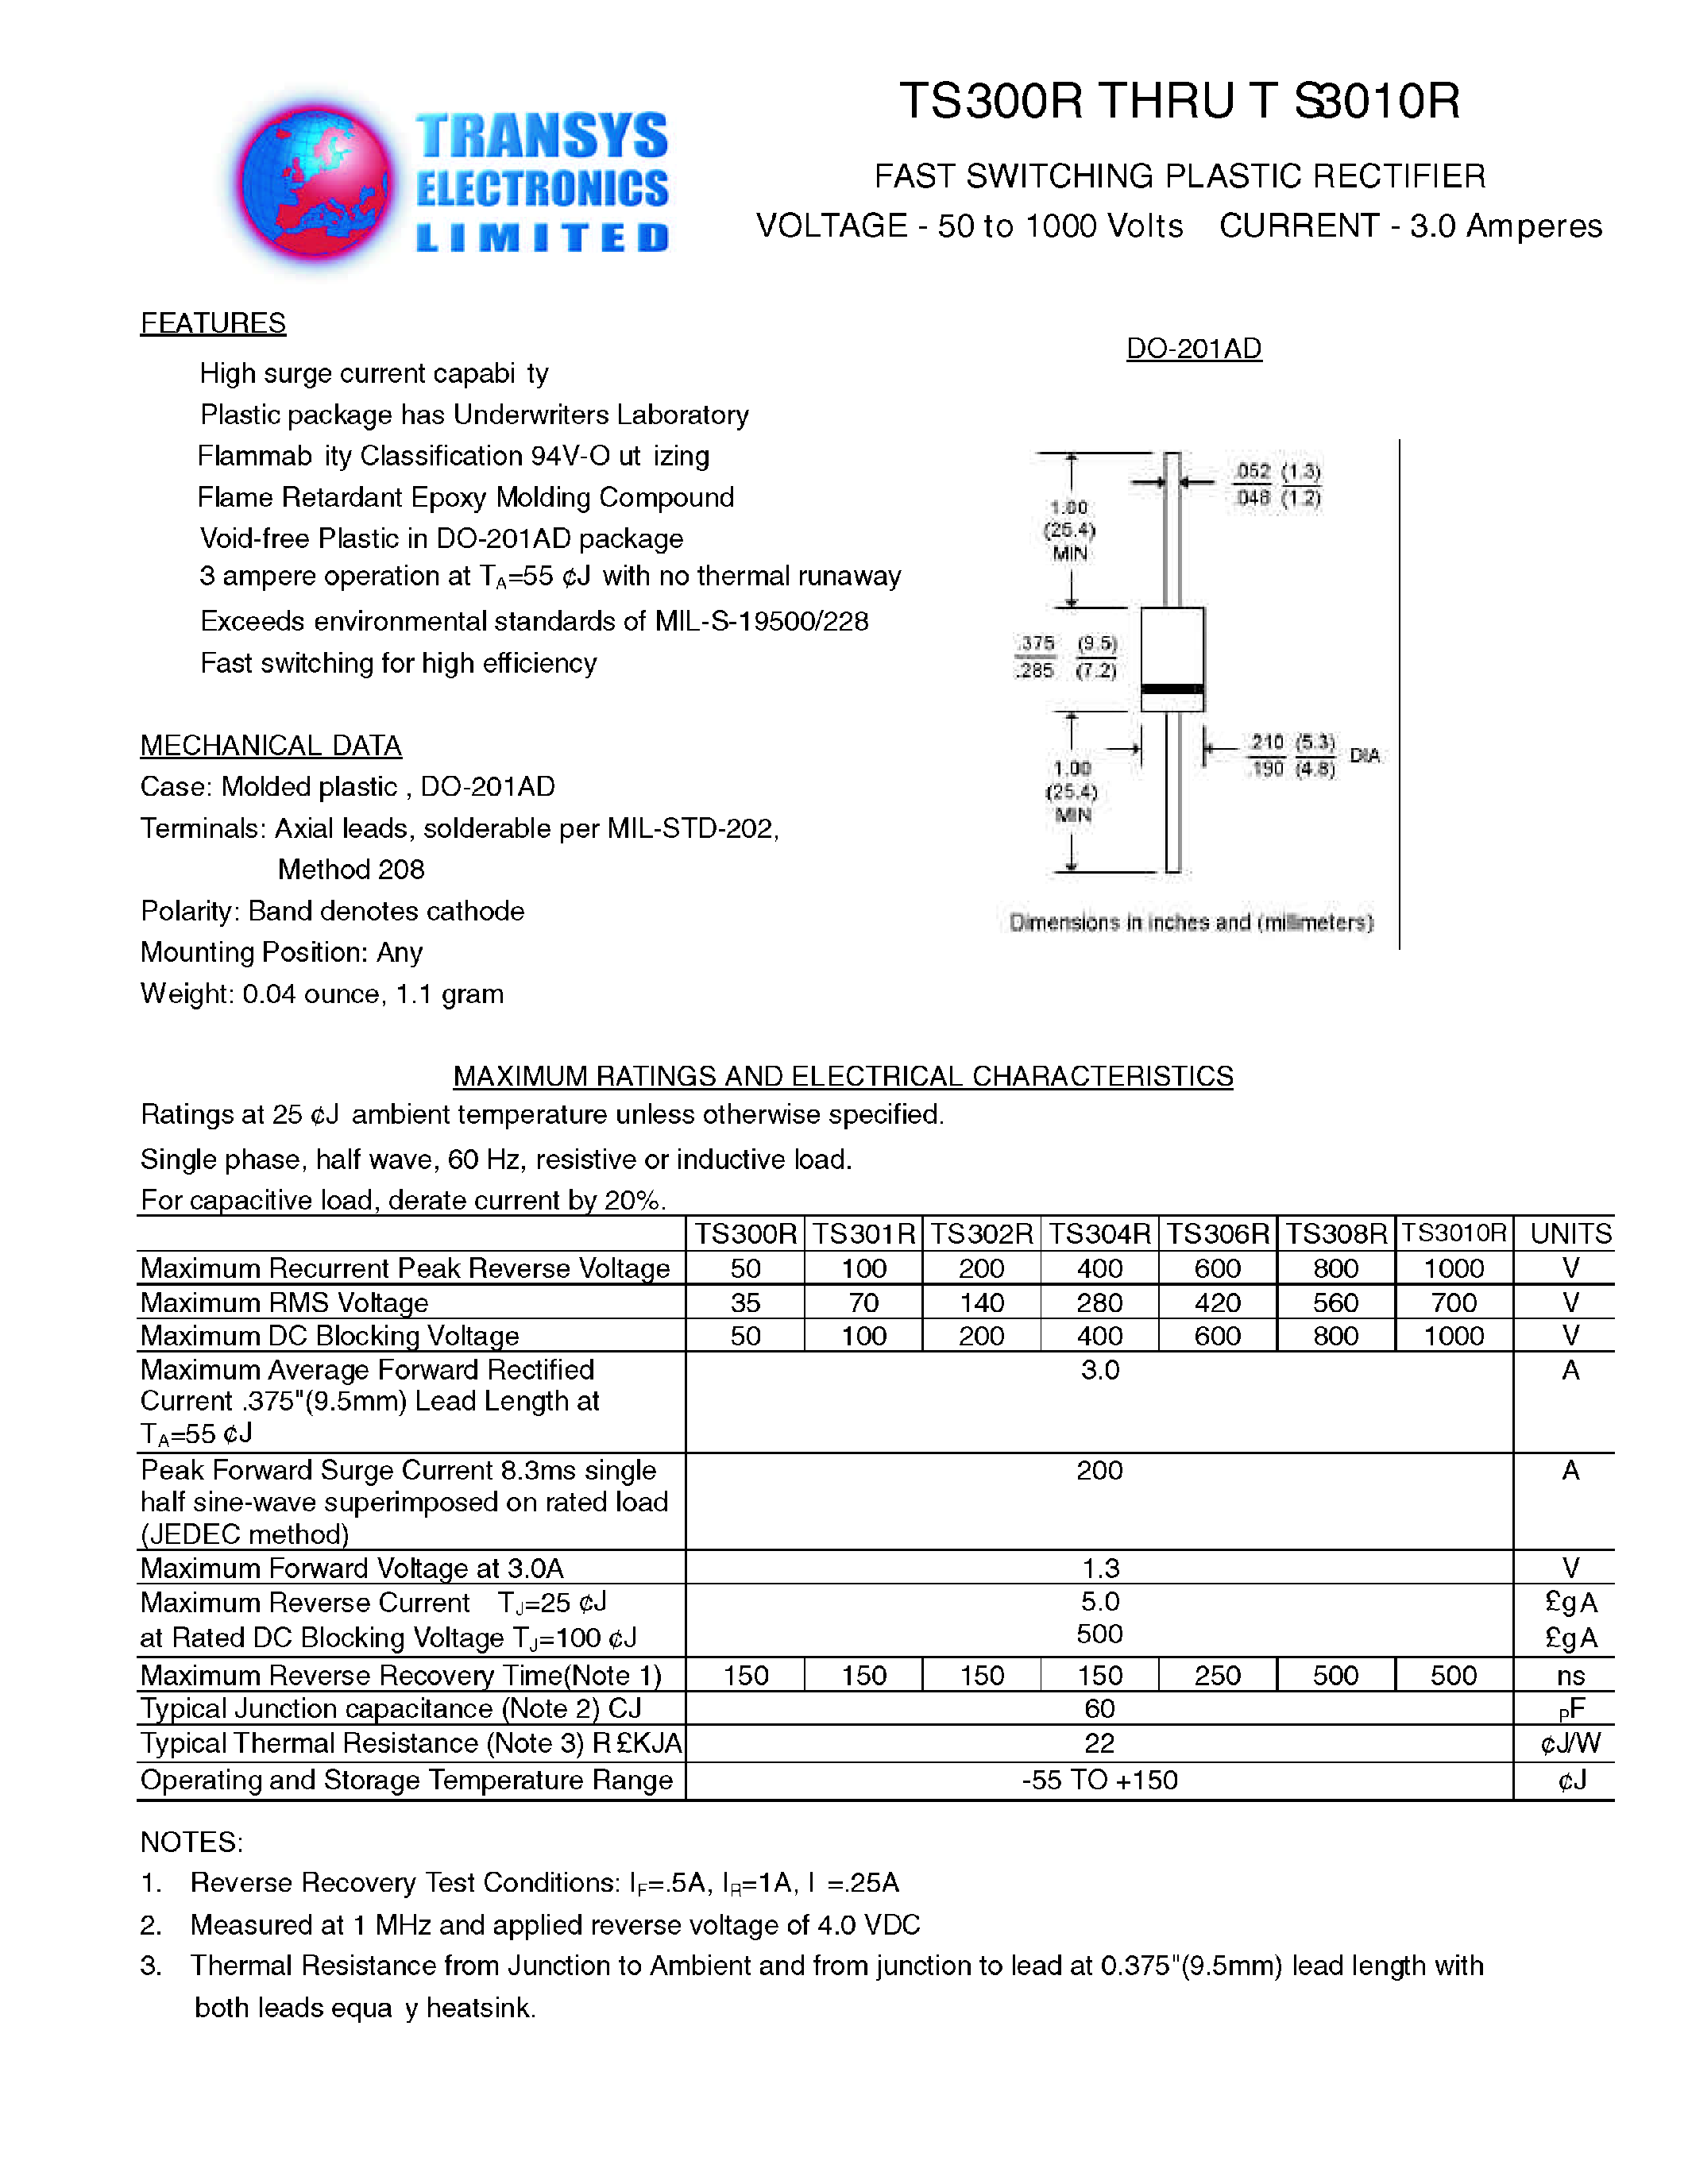 Datasheet TS304R - FAST SWITCHING PLASTIC RECTIFIER page 1